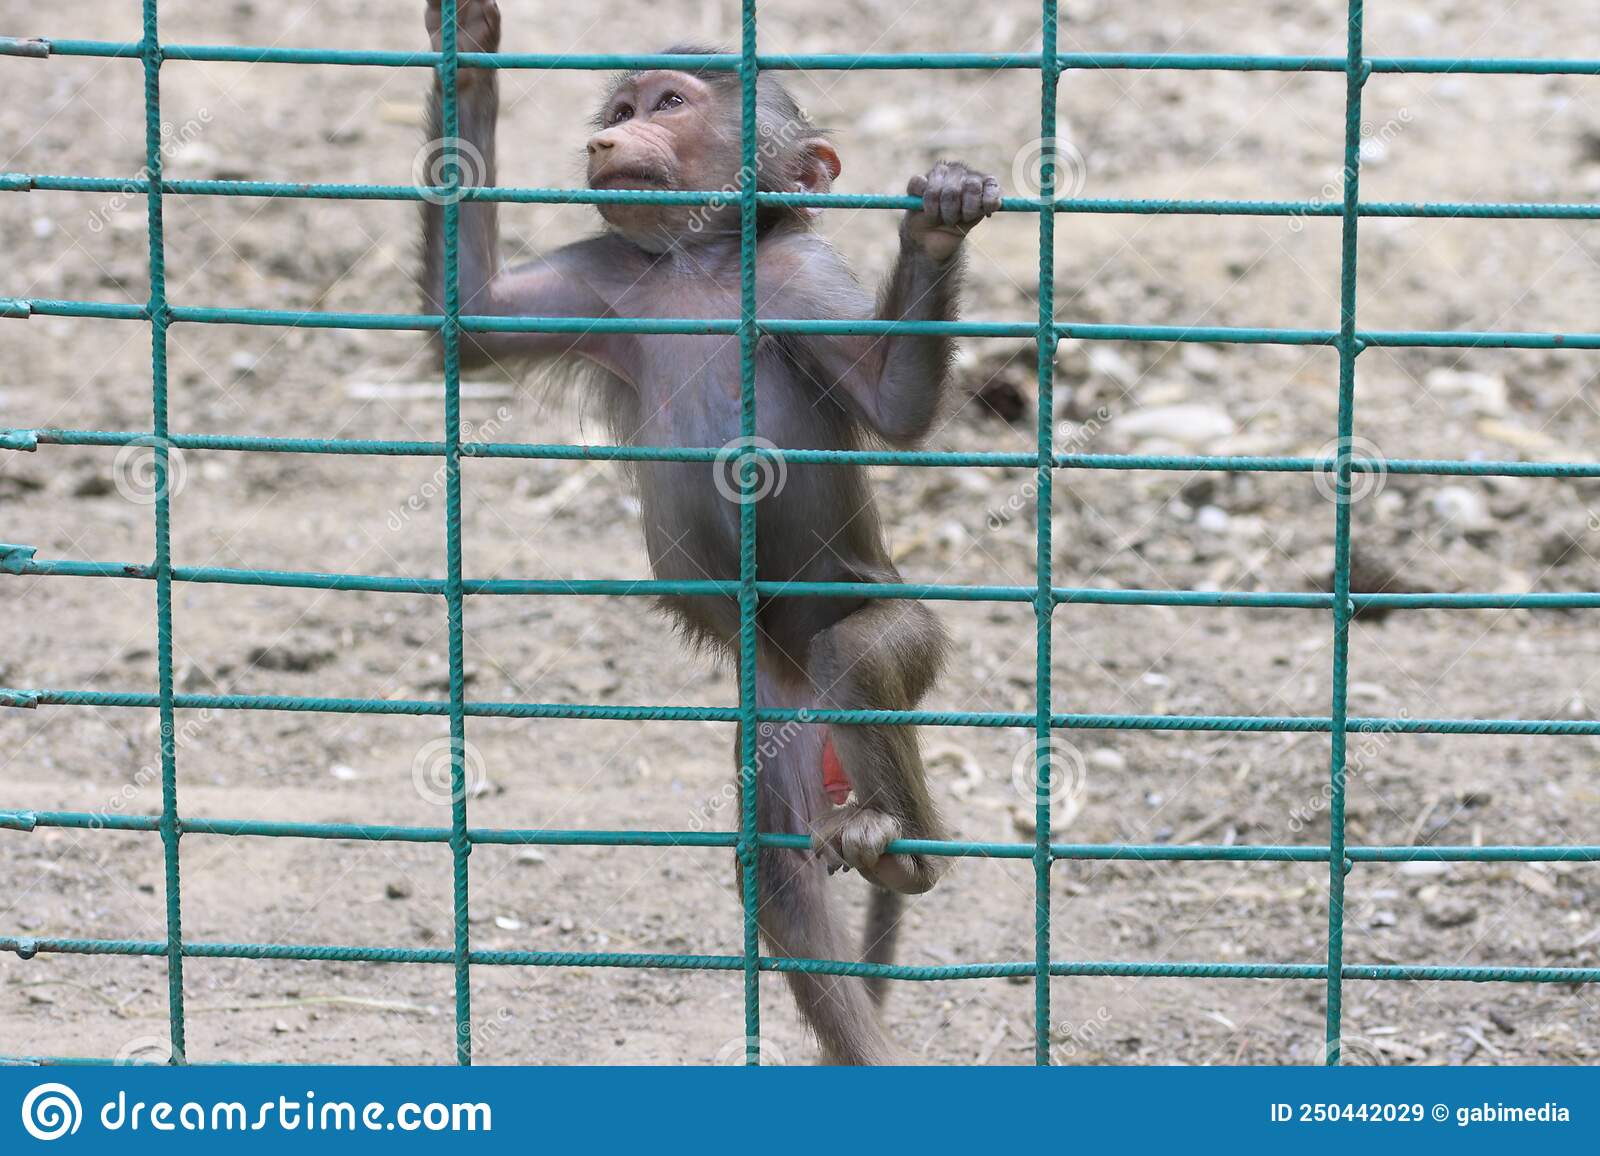 The monkey climbing a fence in the zoo